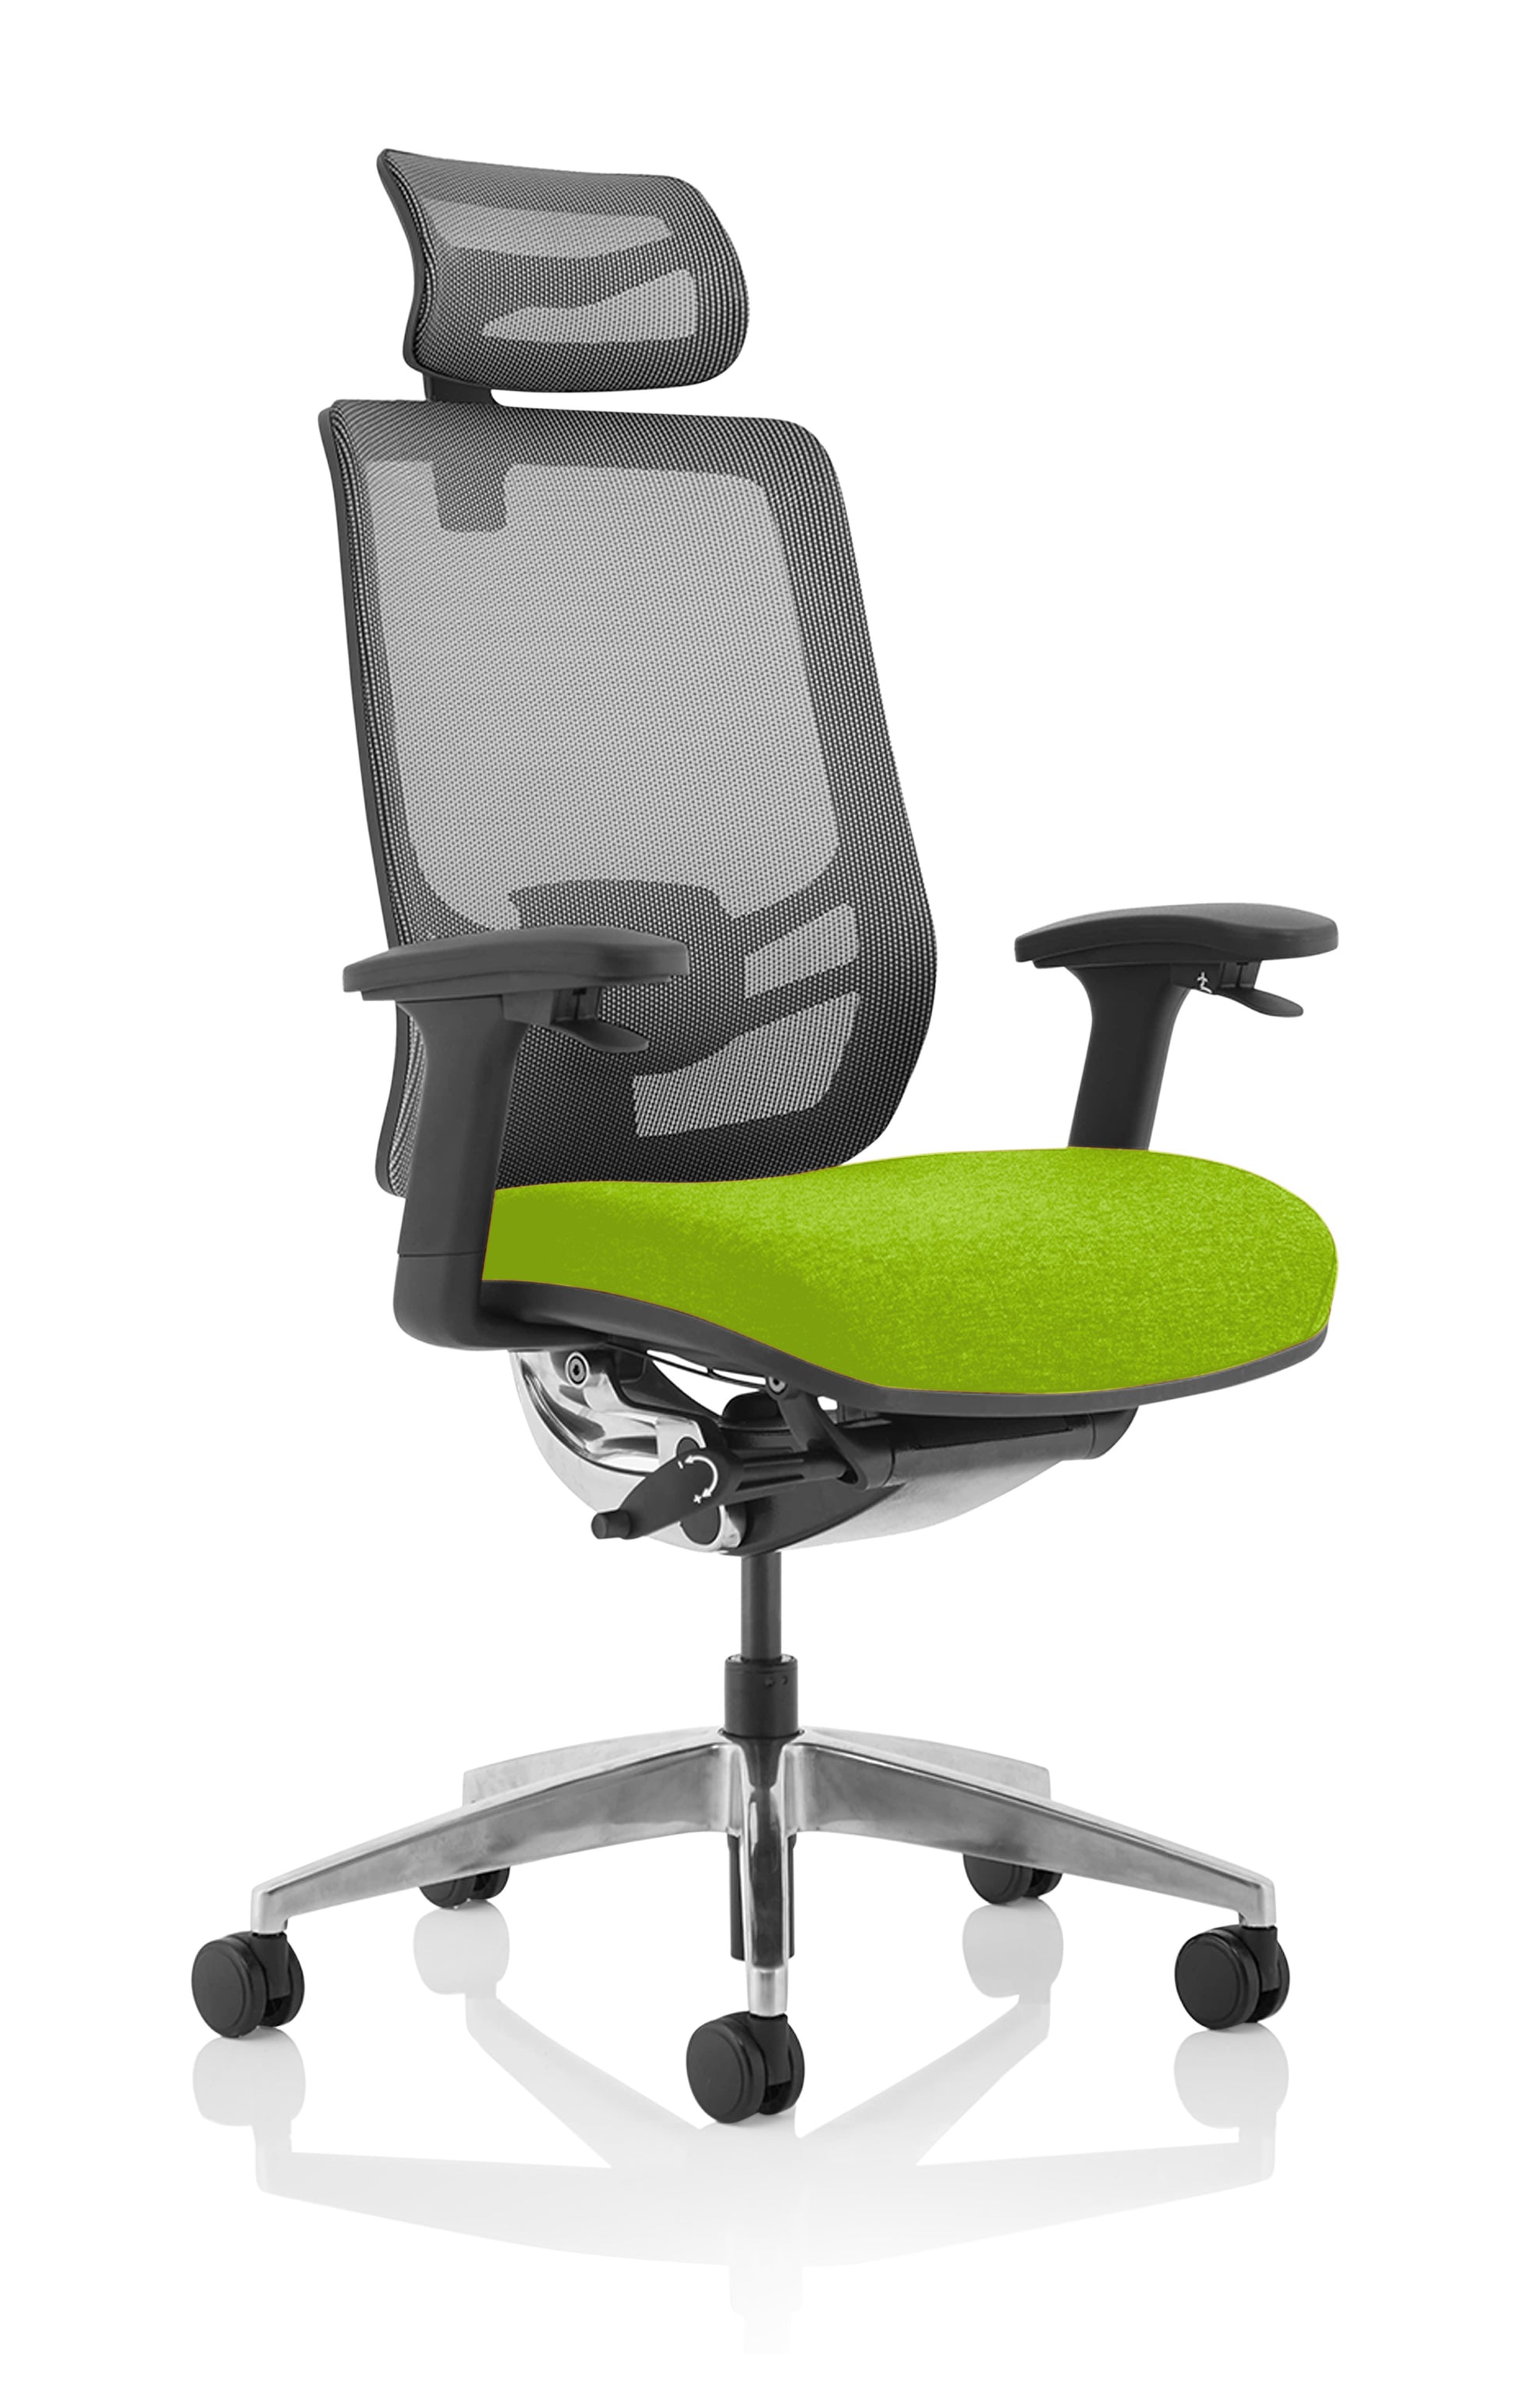 Ergo Click High Back Ergonomic Posture Office Chair with Arms